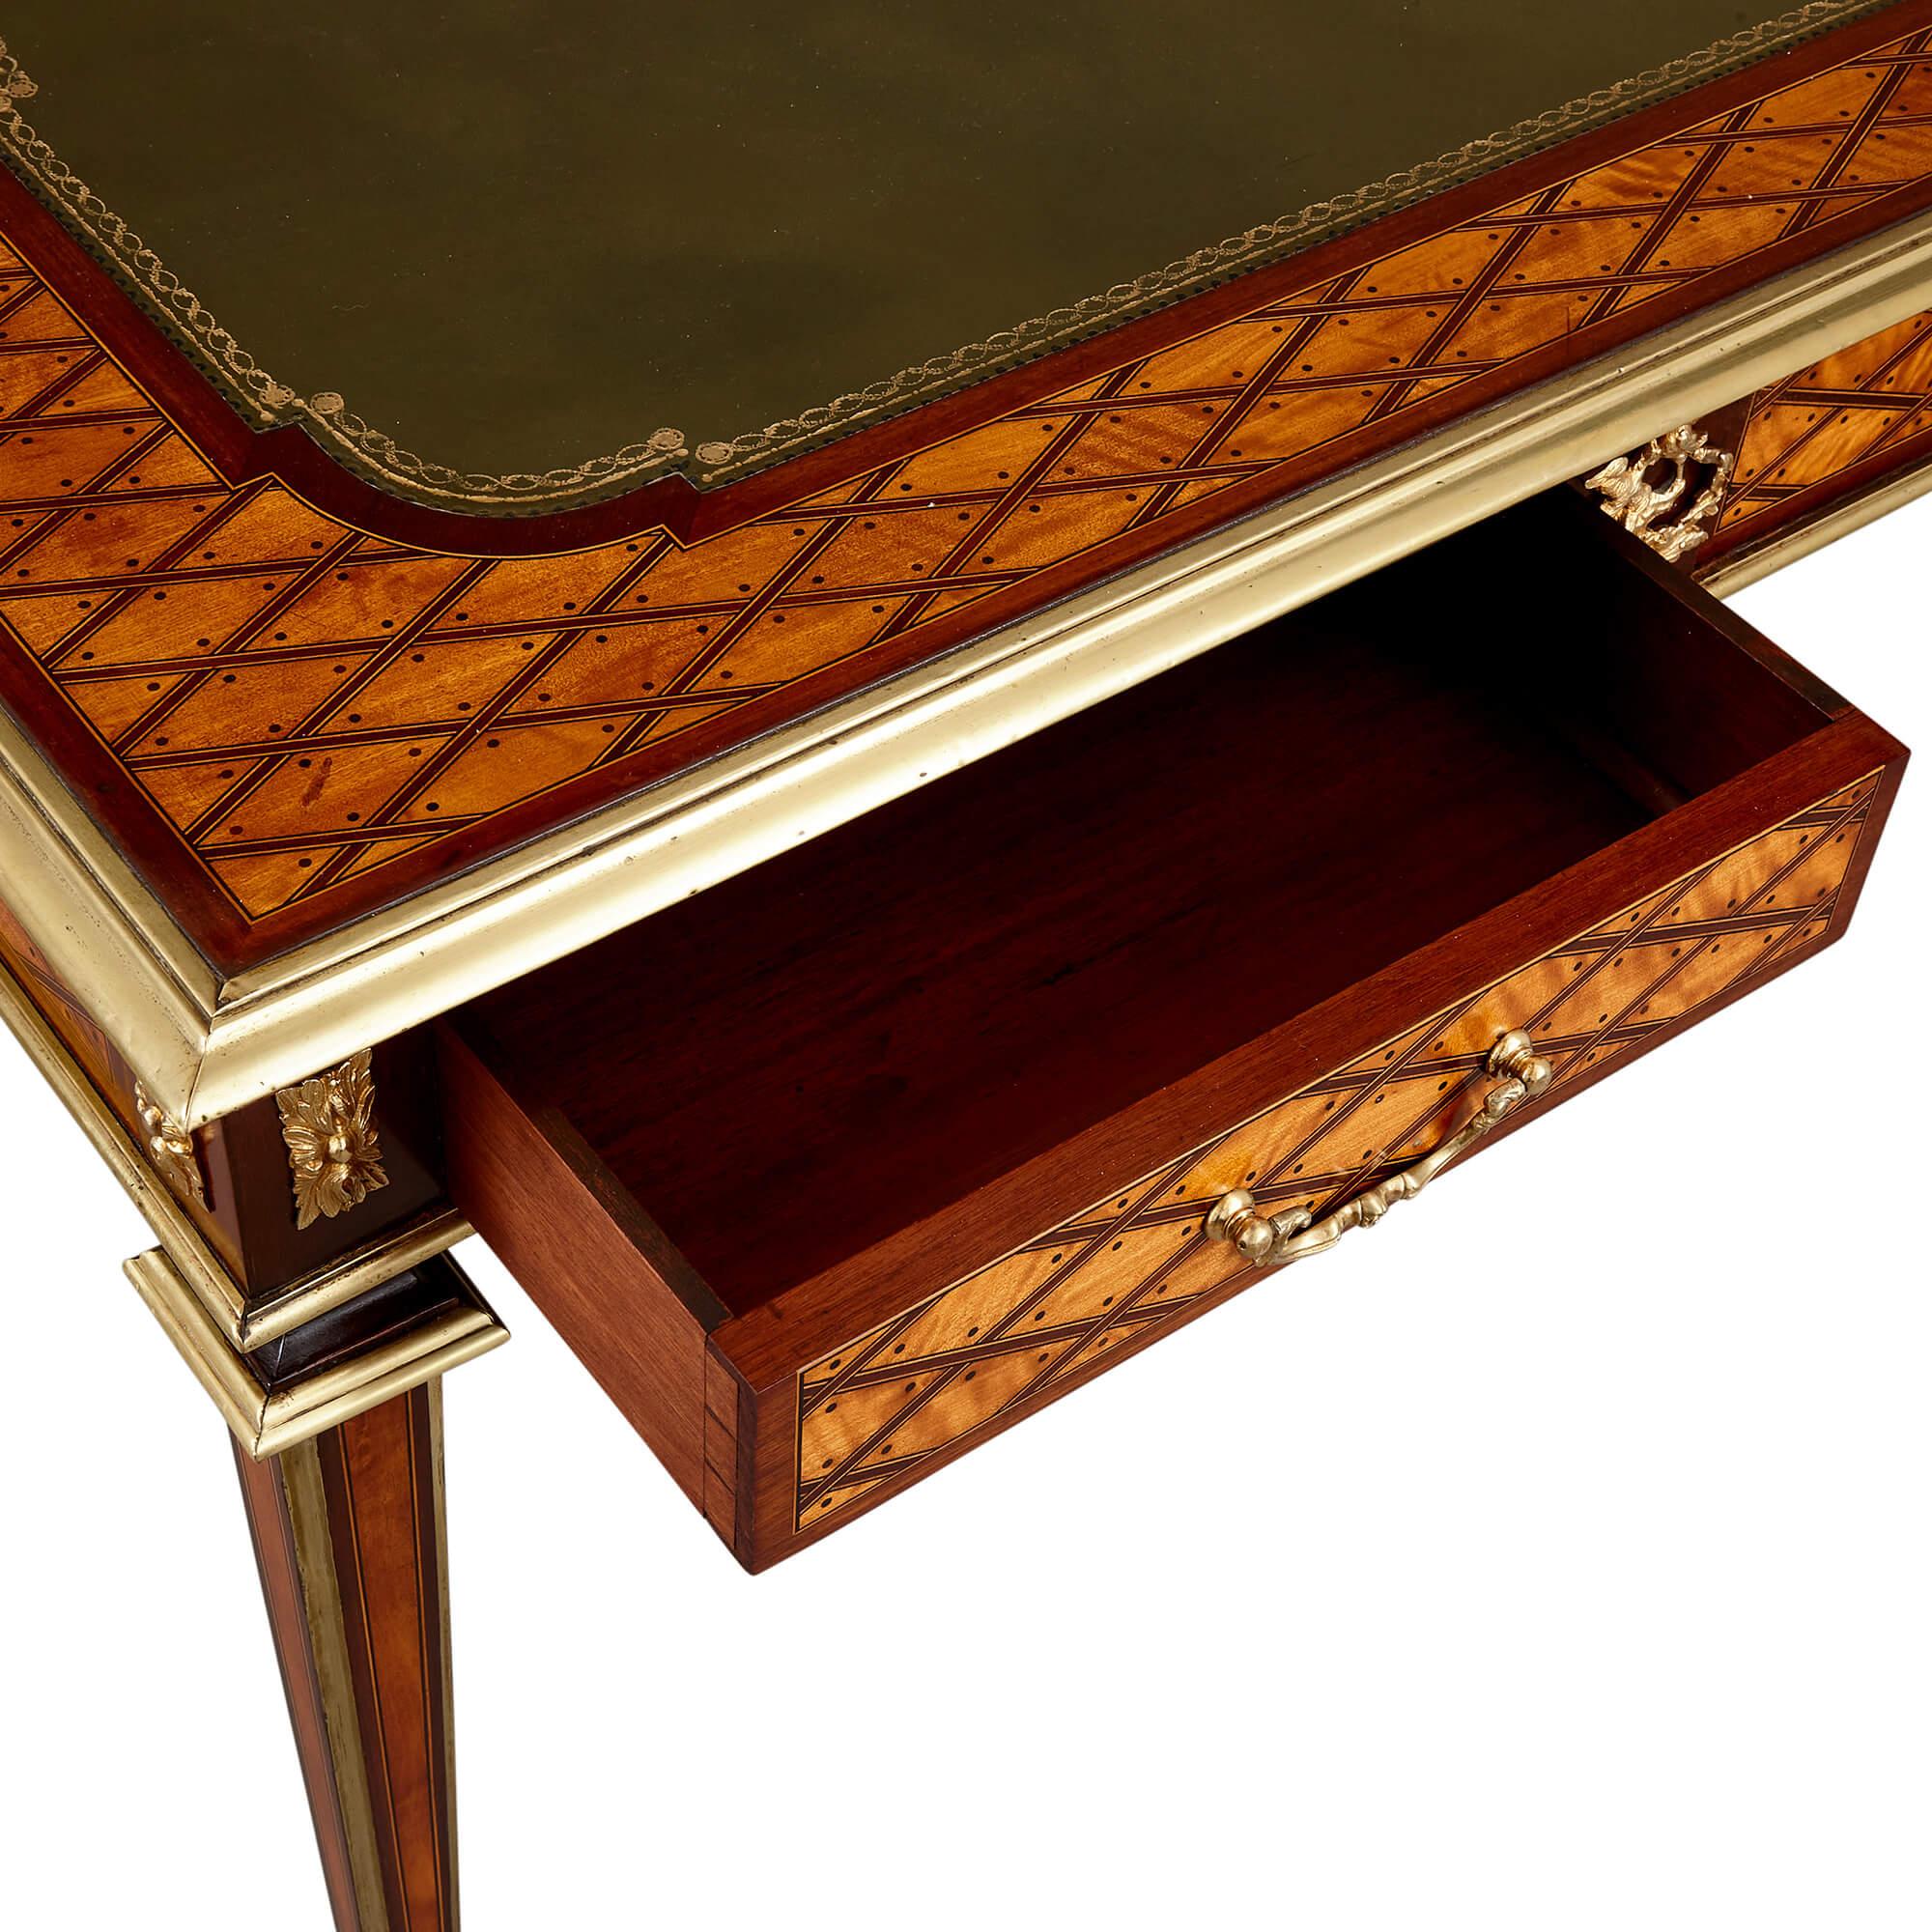 Leather Louis XVI Style Mahogany, Satinwood, Ebony and Ormolu Writing Desk by D. Ross For Sale